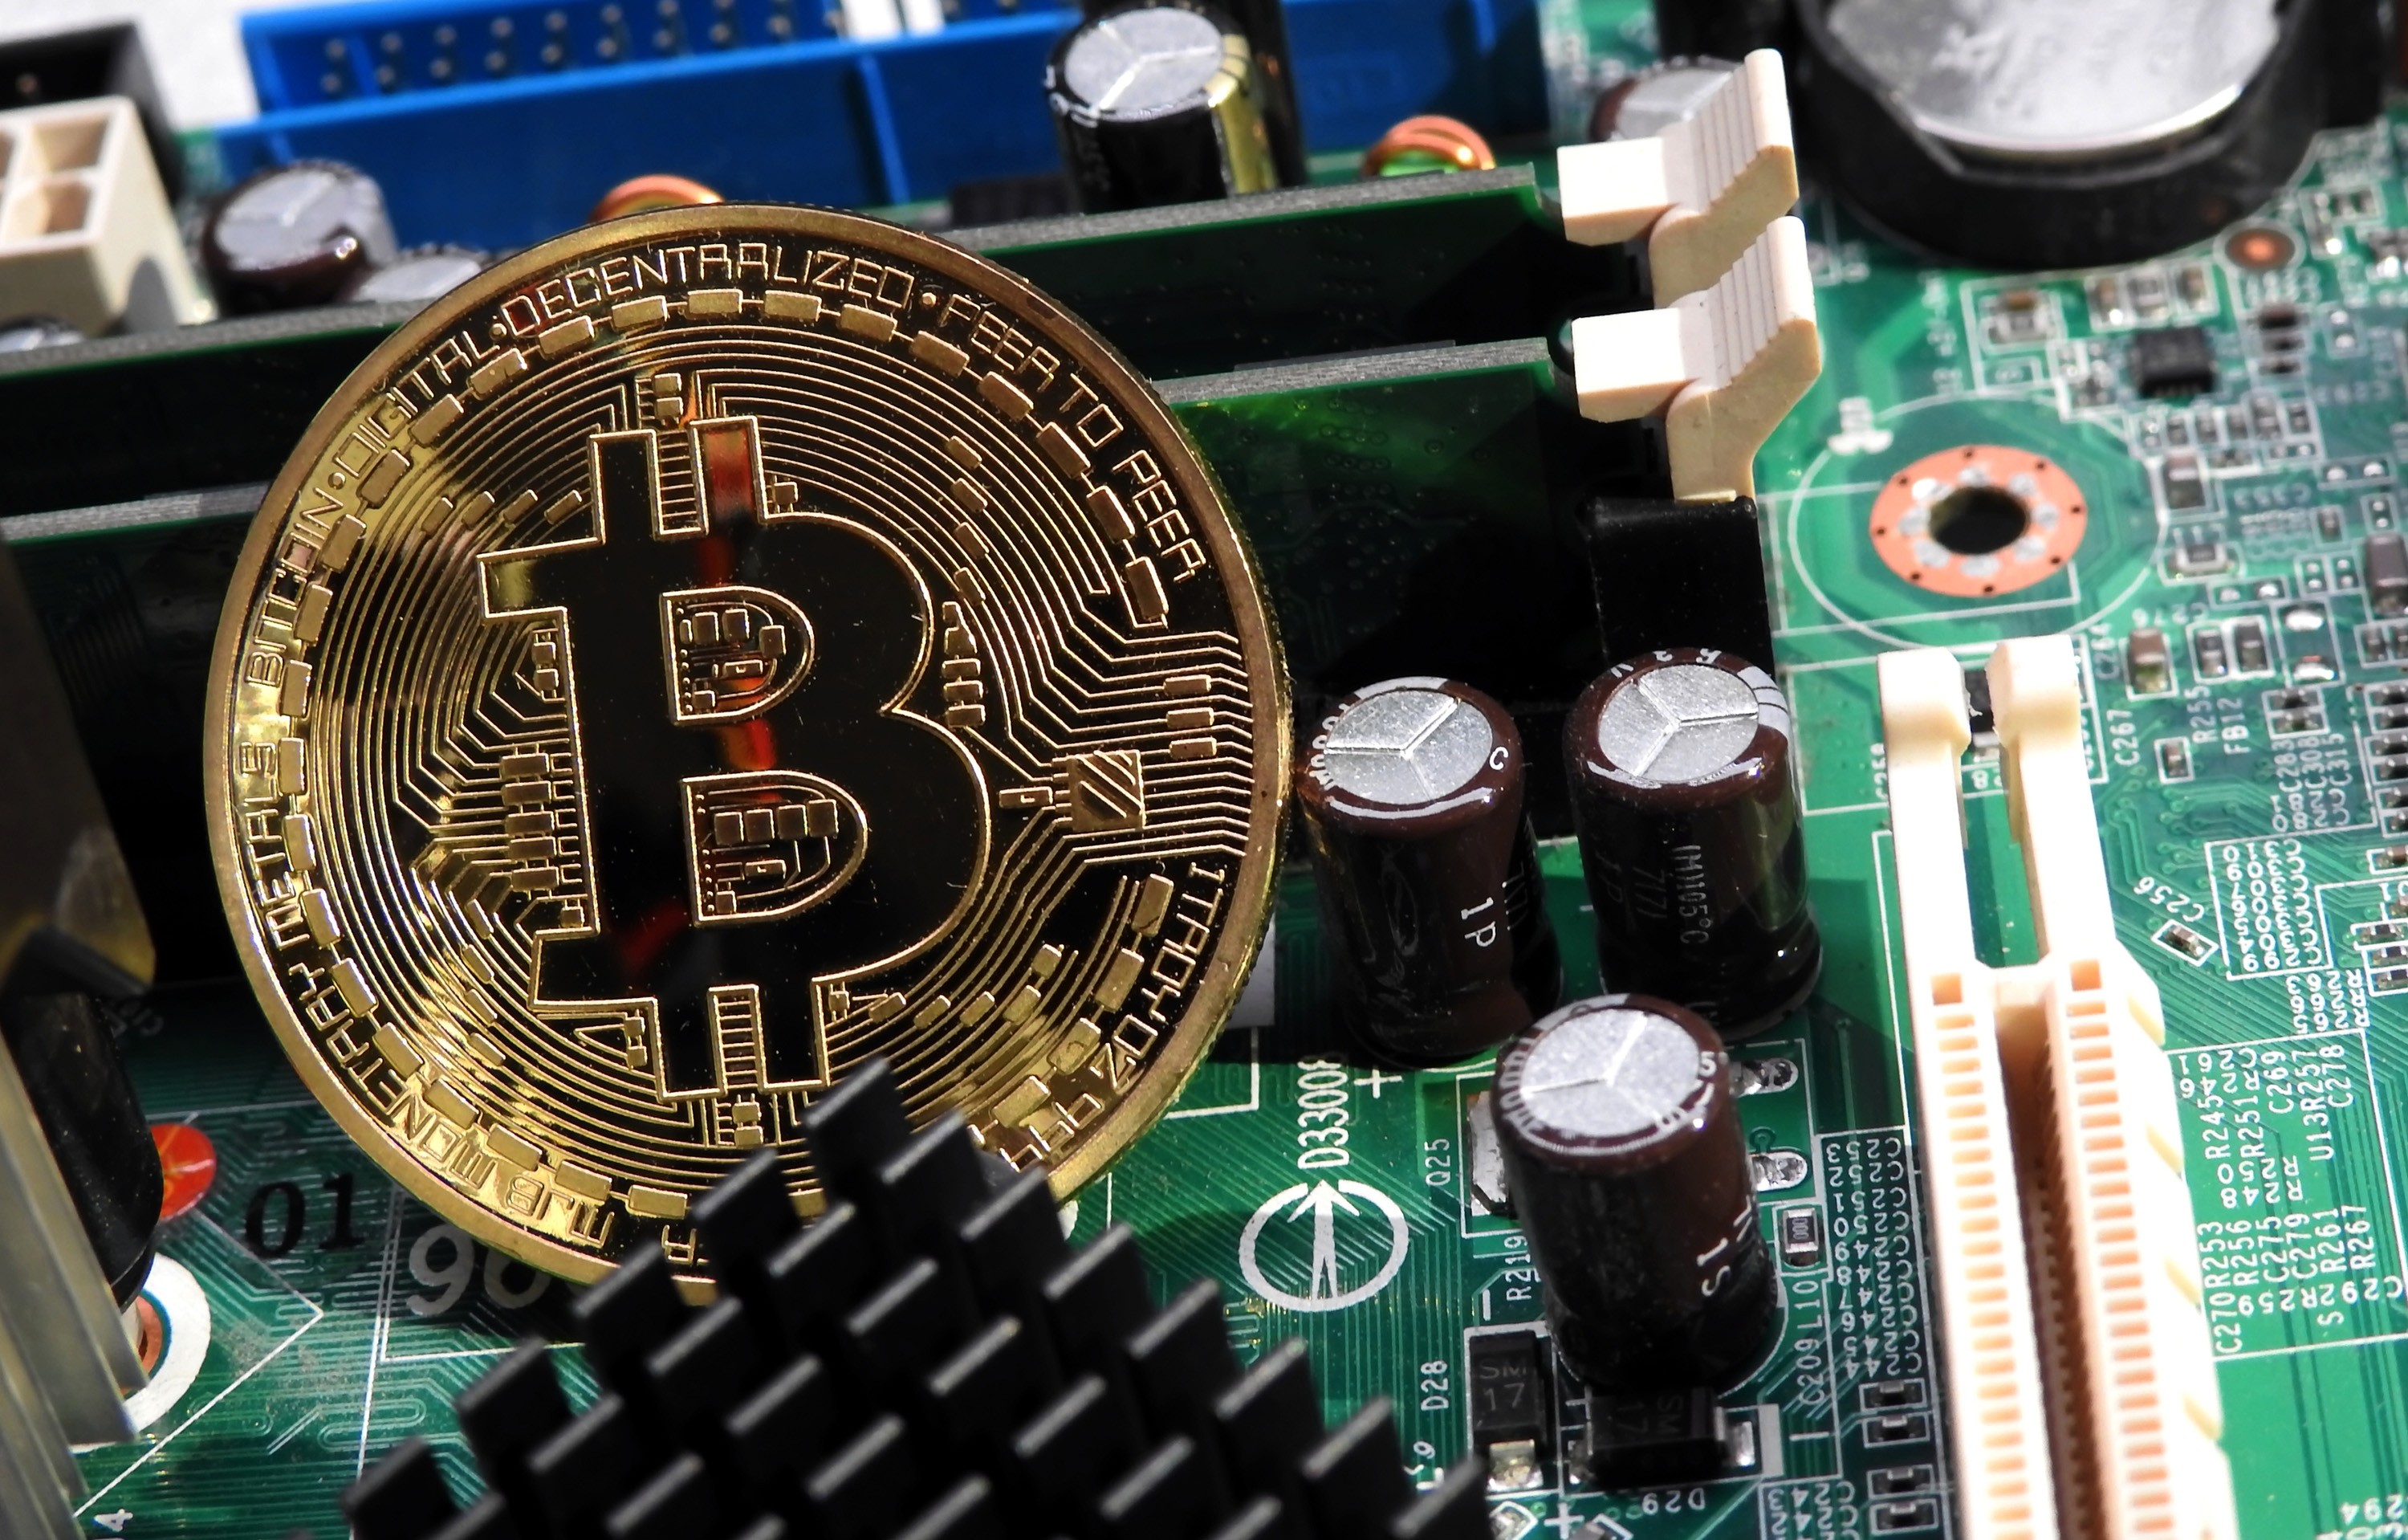 In the San Francisco Bay Area, getting your hands on bitcoin is as easy as a trip to an ATM. Photo: Dreamstime/TNS